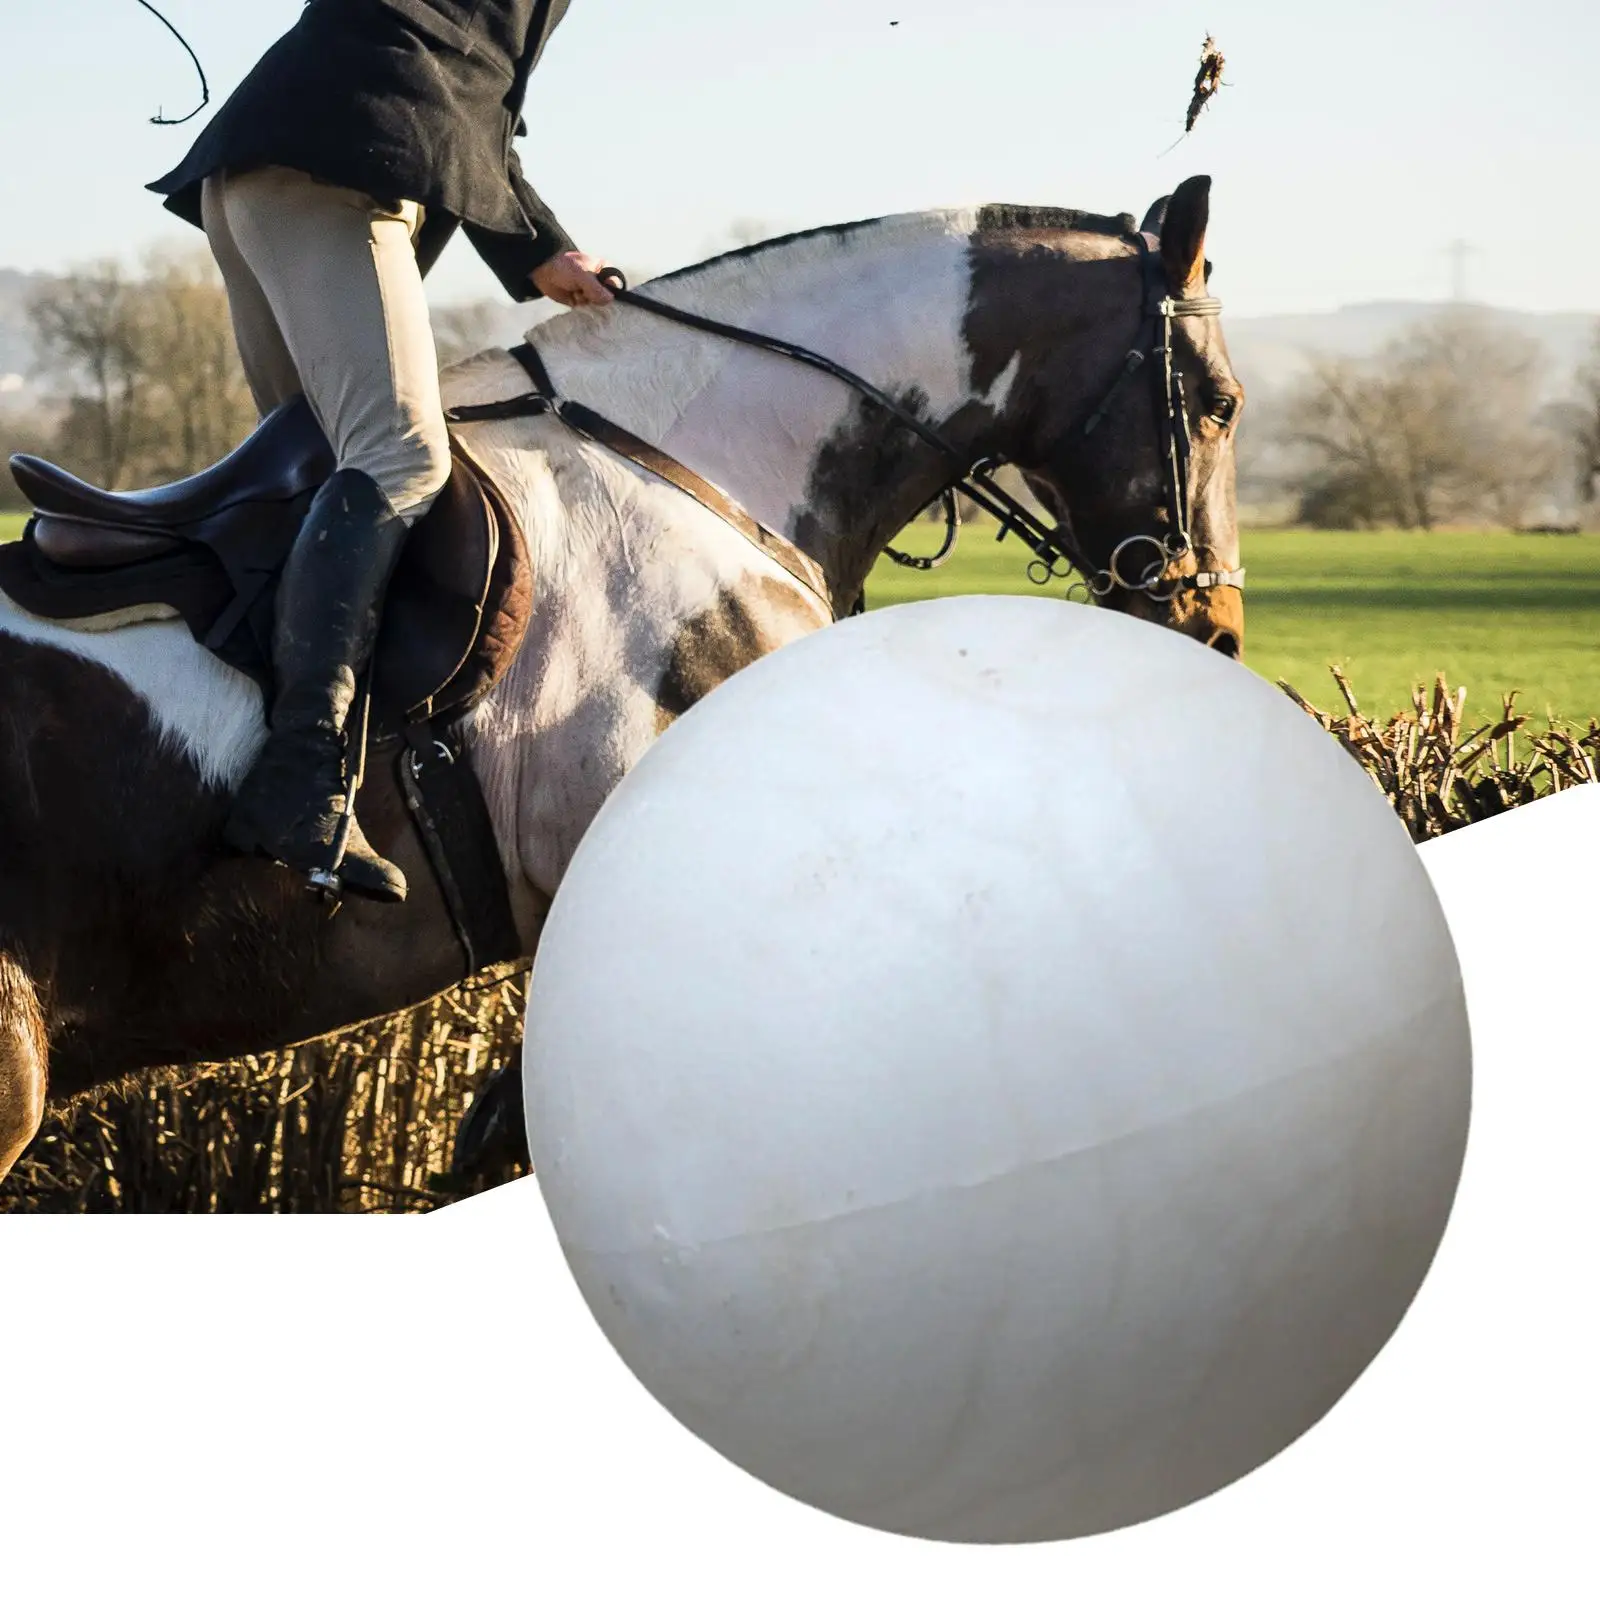 Toss Jolly Play Ball Wear Resistant Lightweight for Game Playing Juggling Goats